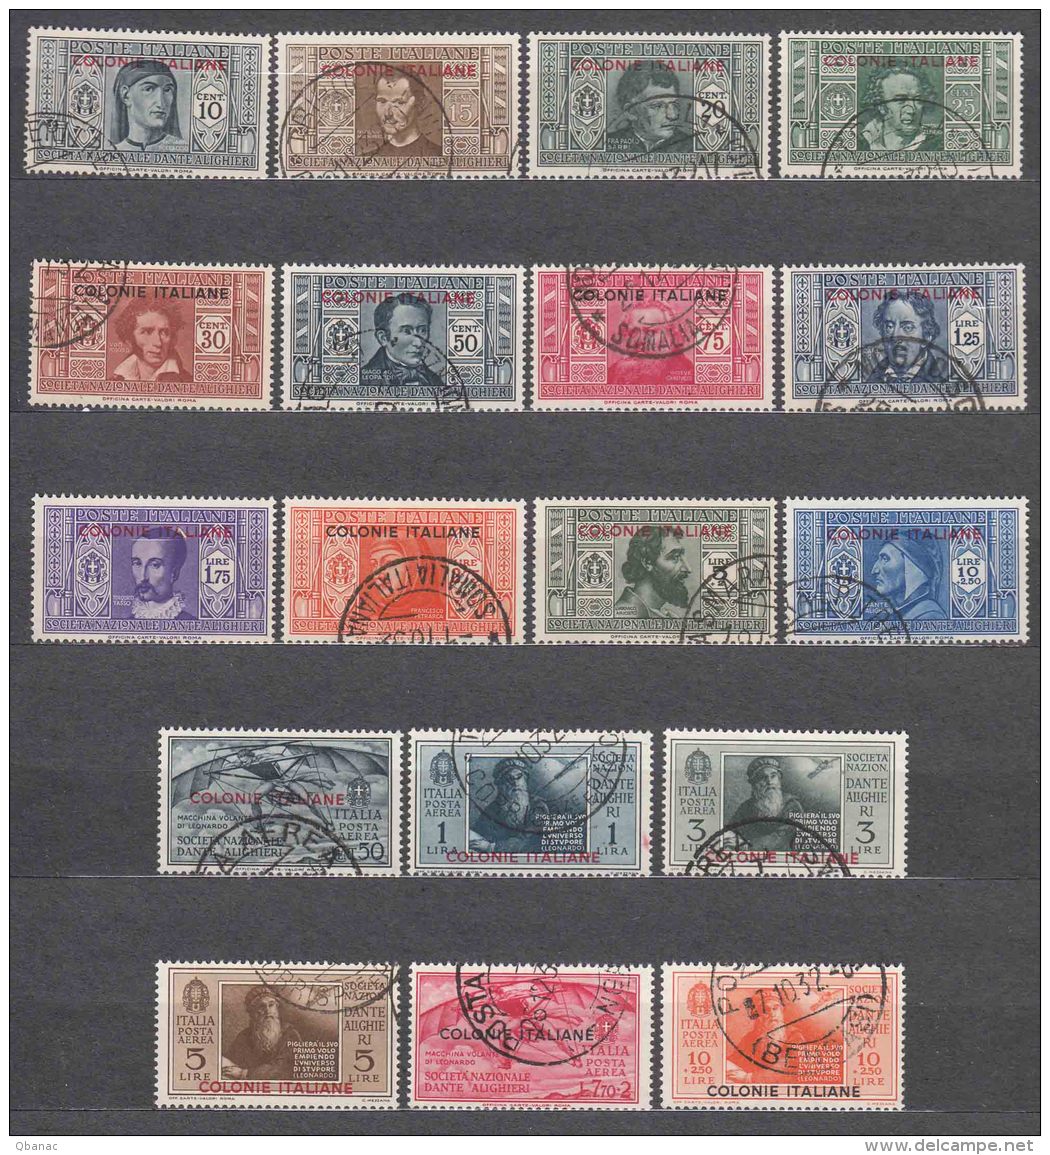 Italy Colonies General Issues, 1932 Sassone#11-22 And Posta Aerea Sassone#A8-A13 Mi#1-18 Used - General Issues